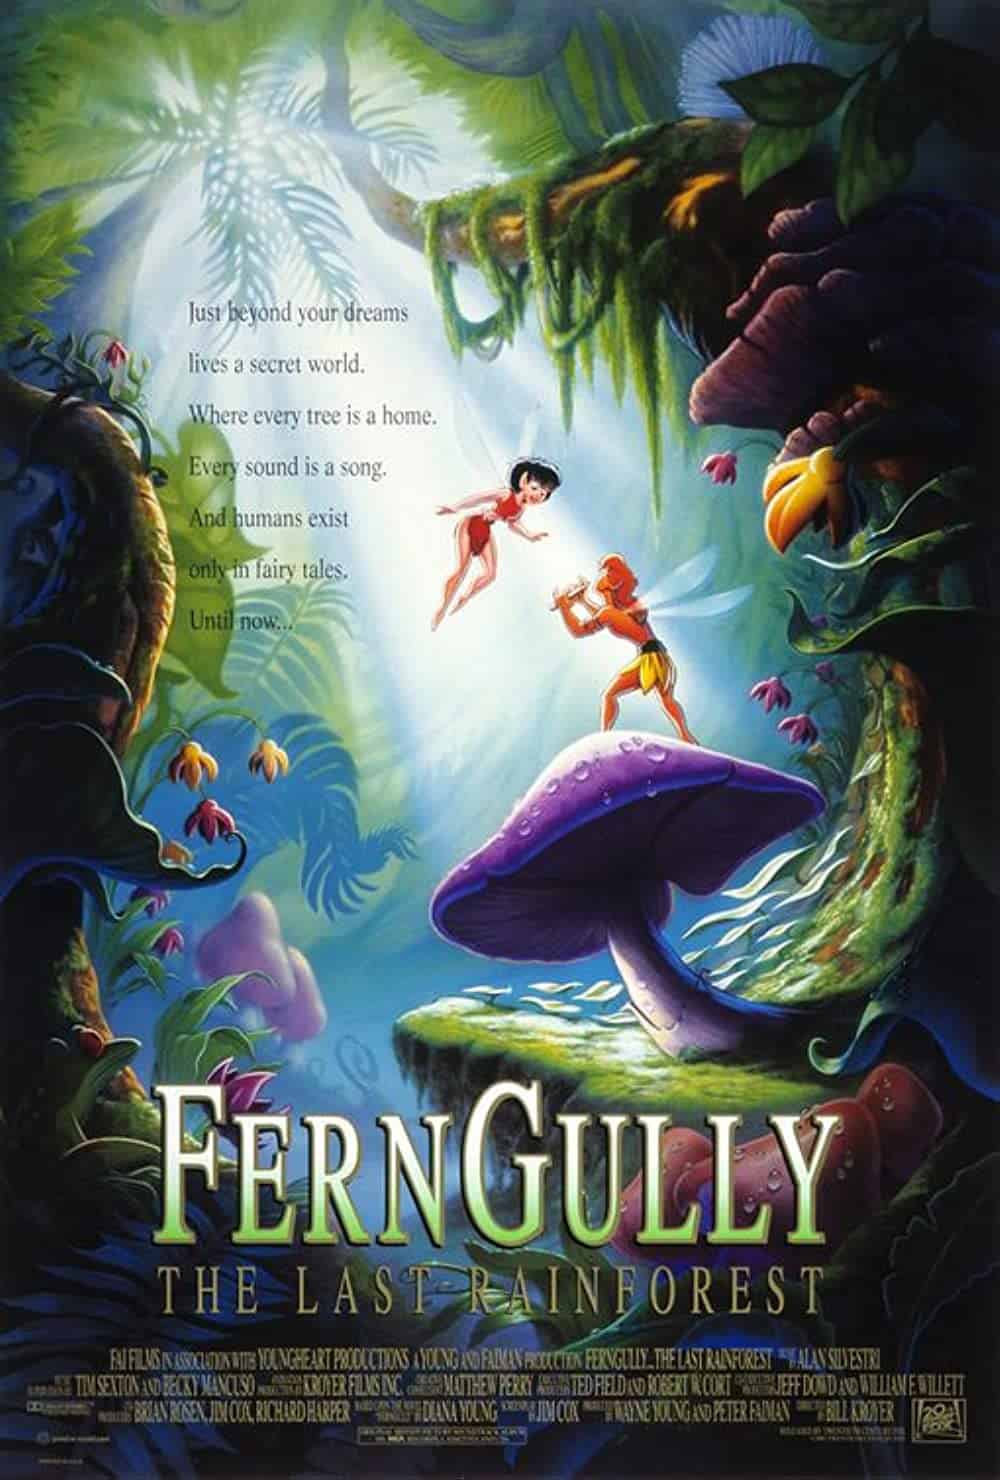 15 Must-See Movies with Guinea Pigs – FernGully The Last Rainforest